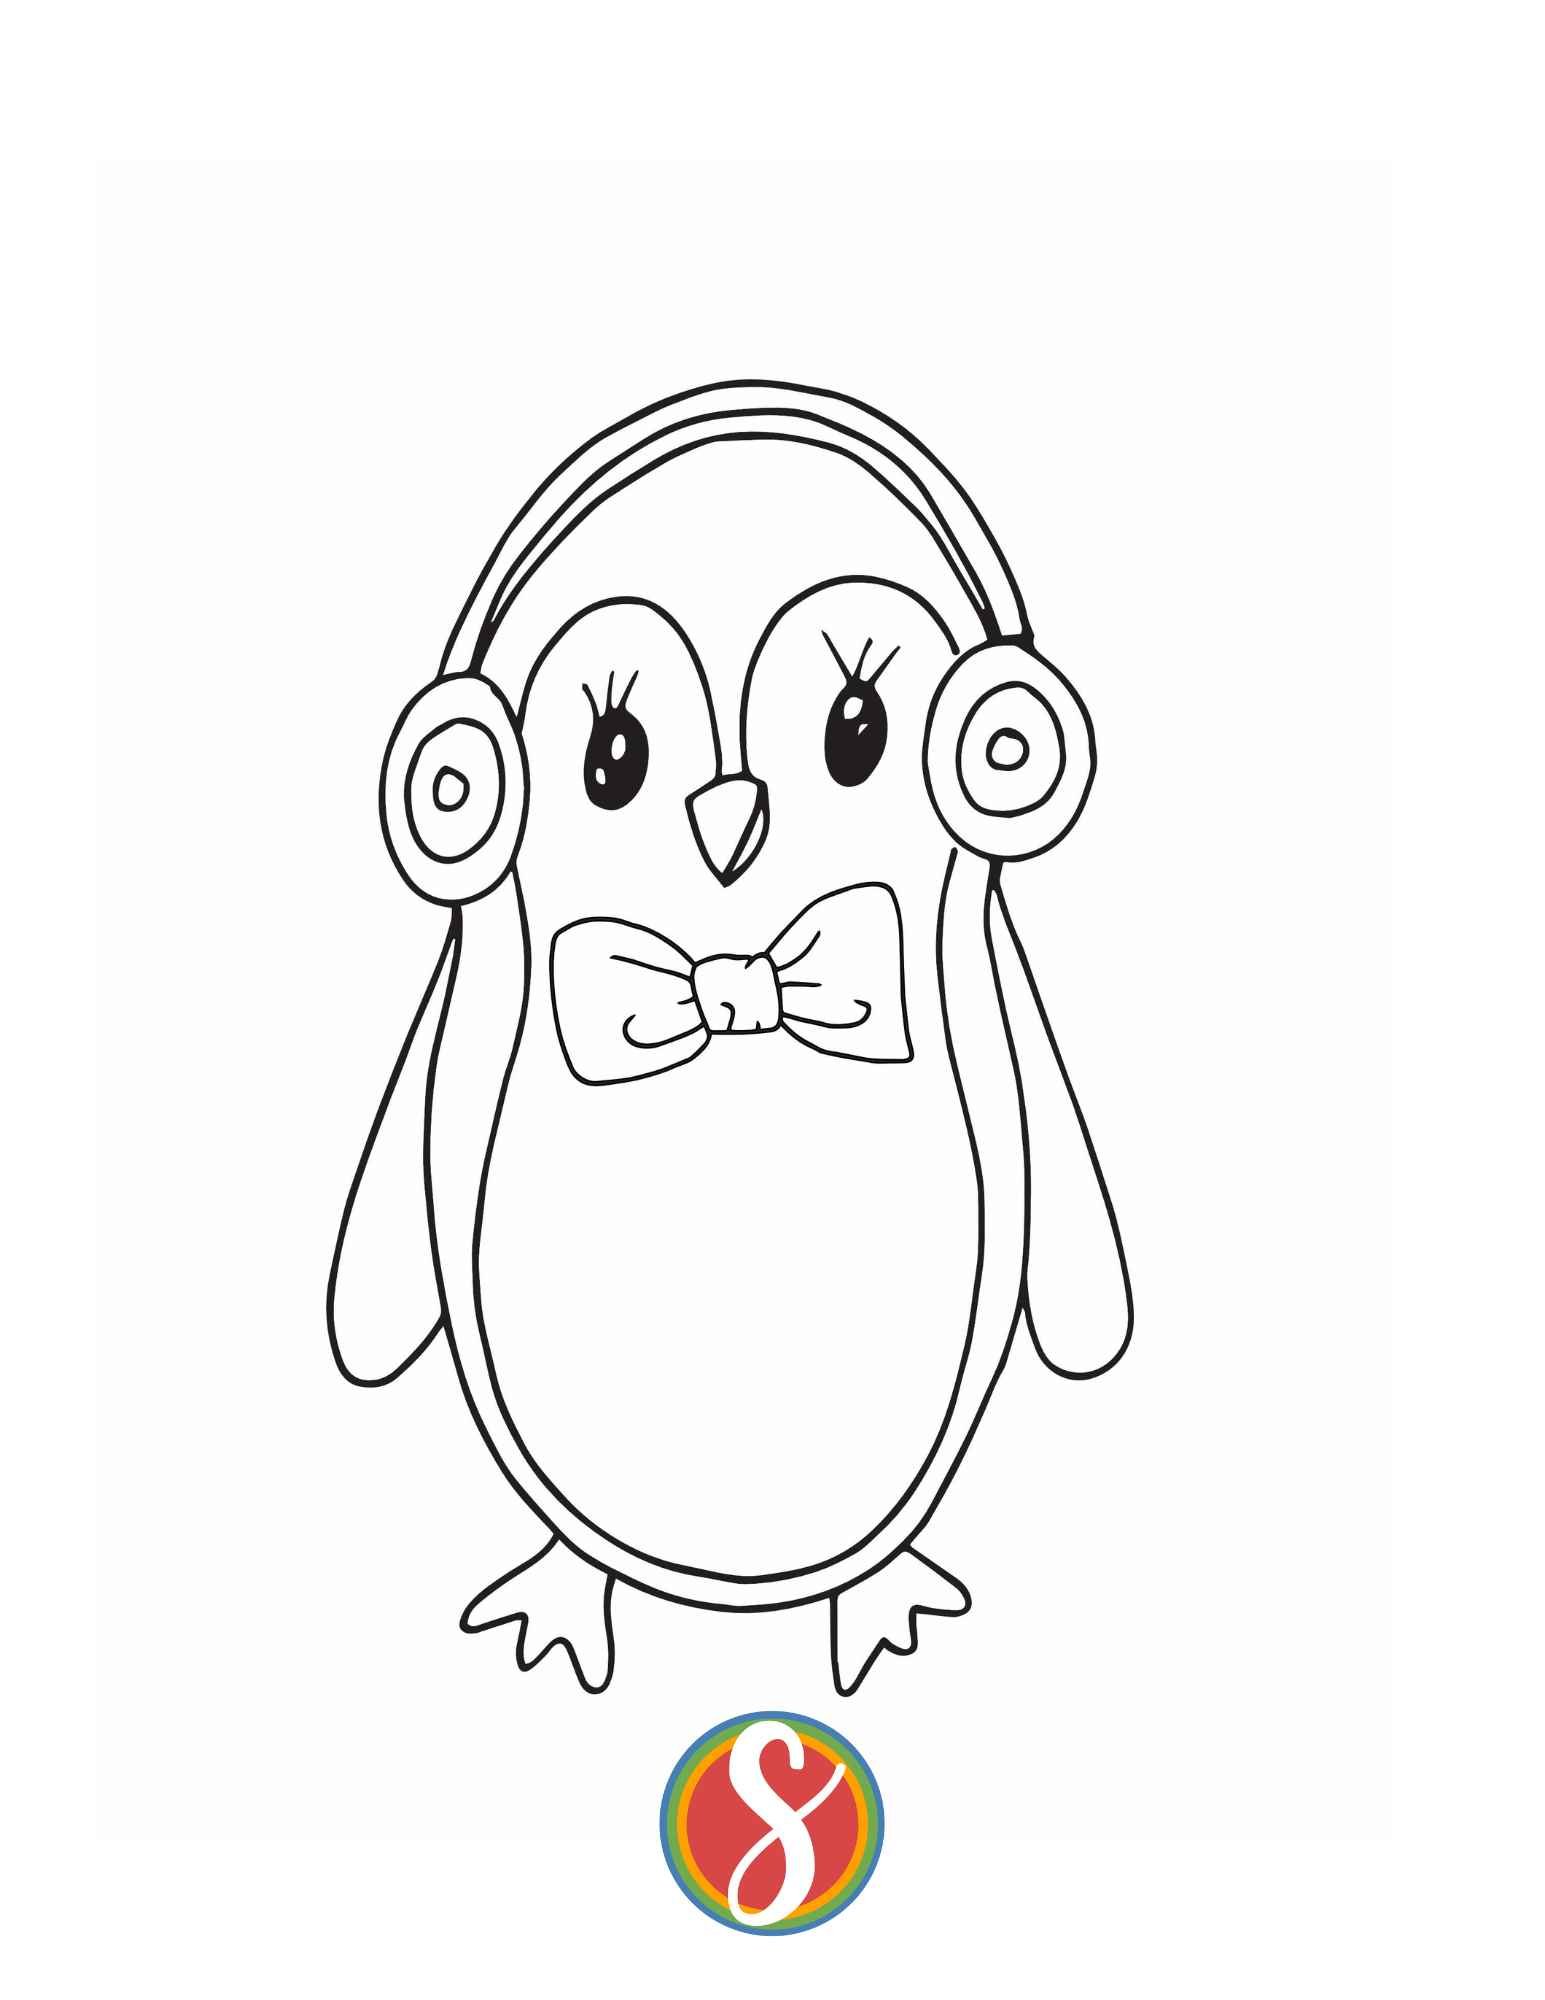 a simple penguin drawing with big eyes, wearing headphones and a bowtie and ready to color